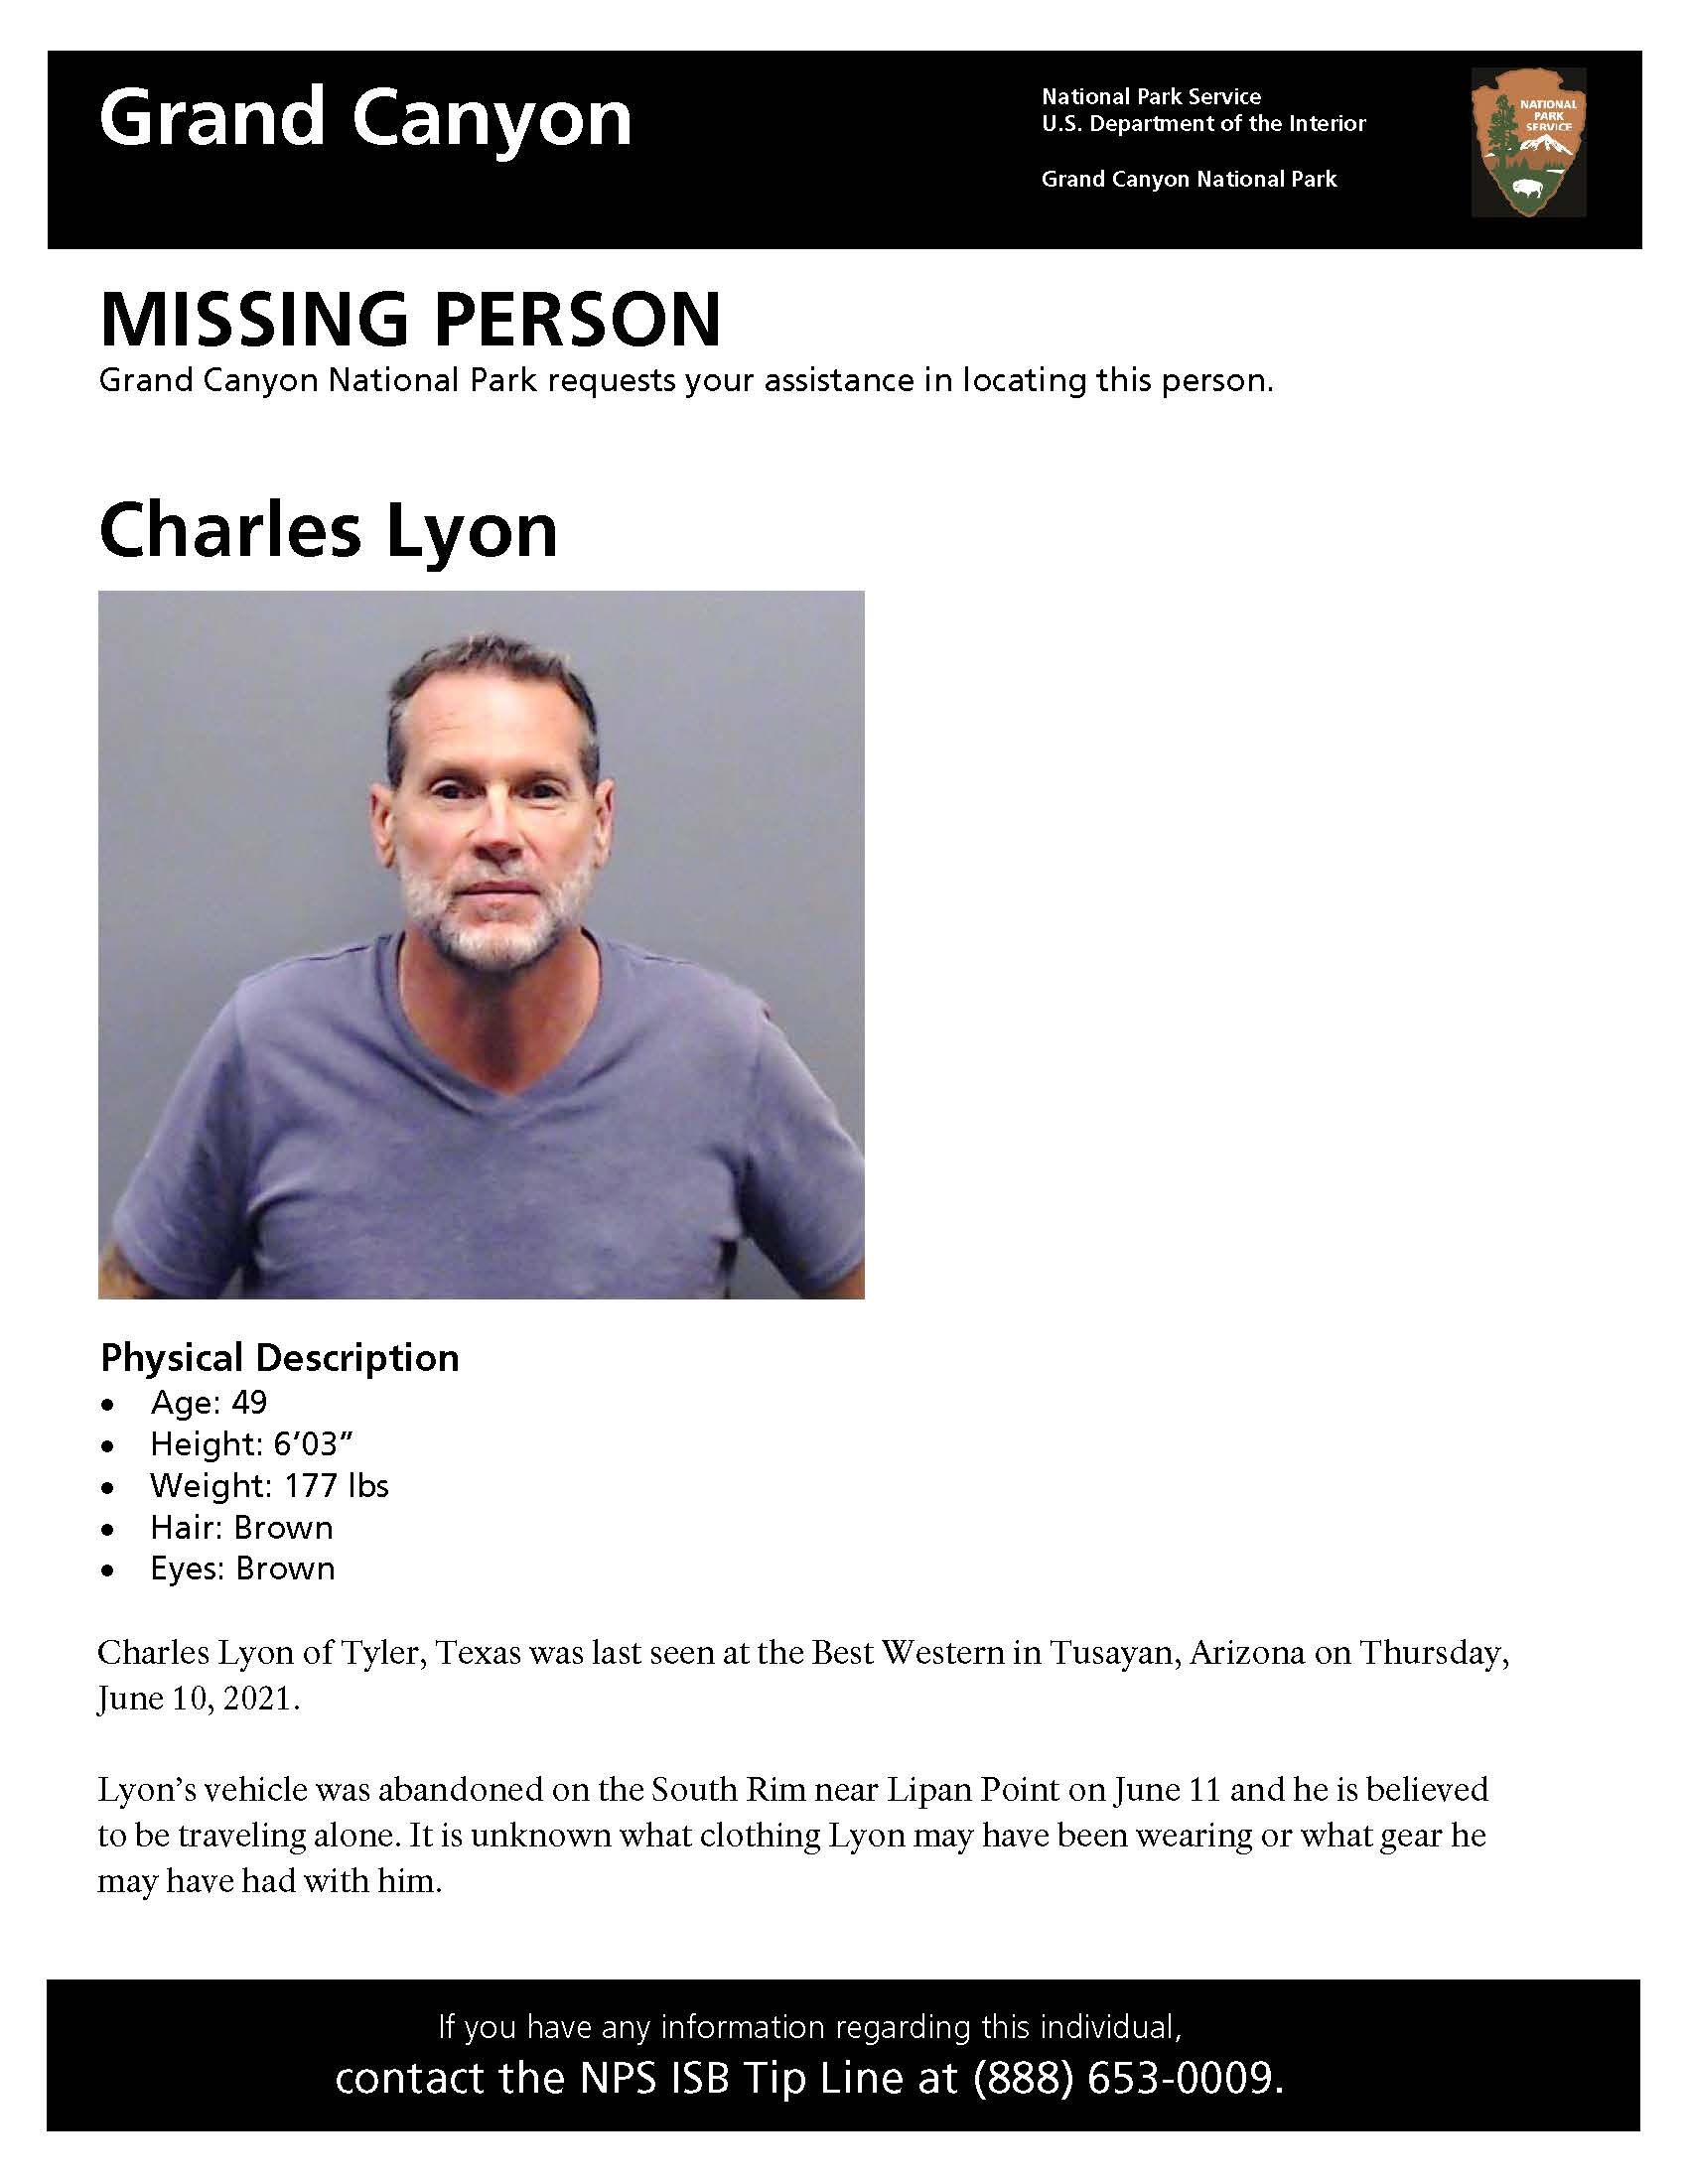 Missing person poster for Charles Lyon